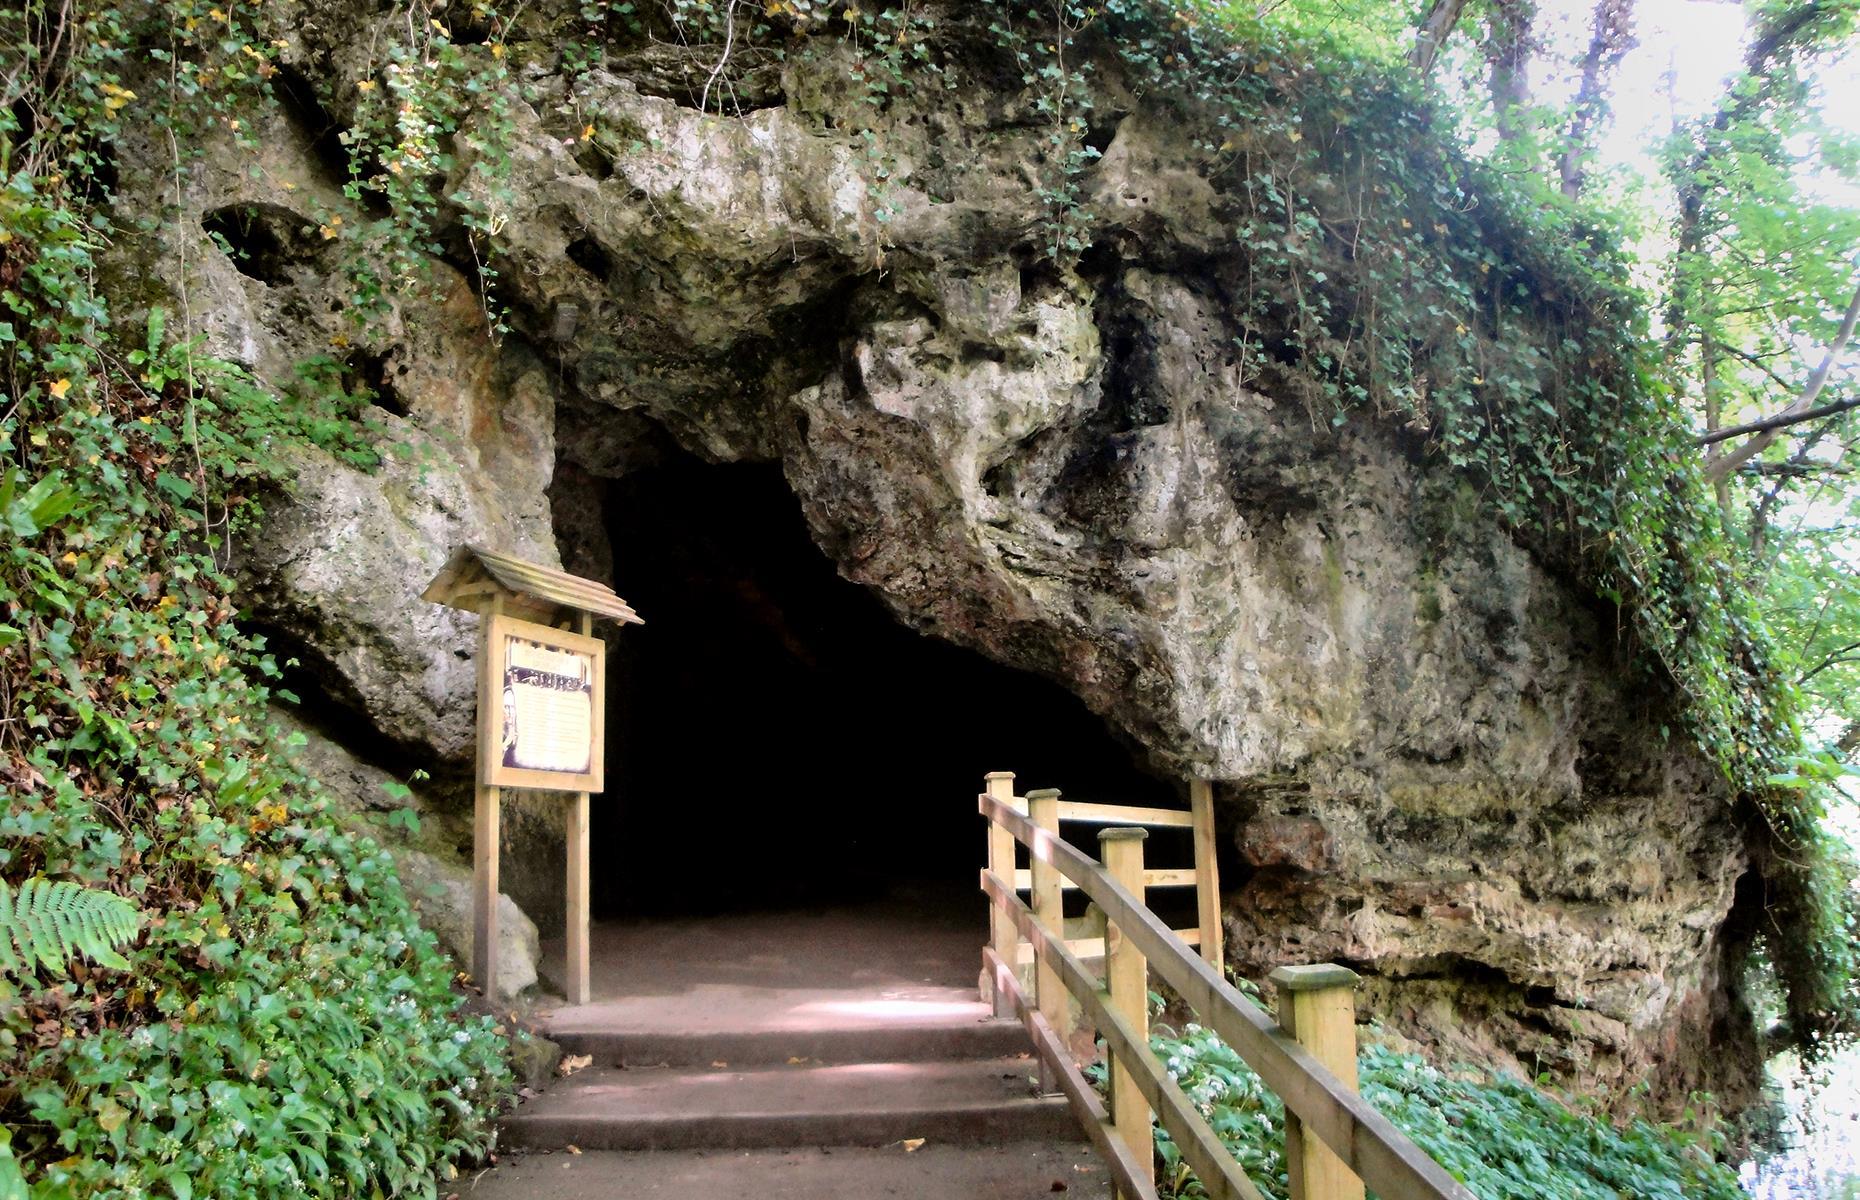 <p>It's no surprise that a dark and echoey cavern might be on the creepy side, but <a href="https://www.mothershipton.co.uk/the-park/">this one</a> has a spooky backstory to match. It's said to be the birthplace of its namesake, Mother Shipton, a witch and prophet known for predicting pivotal events like the Great Fire of London and the death of kings. Centuries on, her eerie abode and the dense woodland in which it's located fascinates visitors.</p>  <p><strong><a href="http://bit.ly/3roL4wv">Follow our Facebook page for more travel inspiration</a></strong></p>